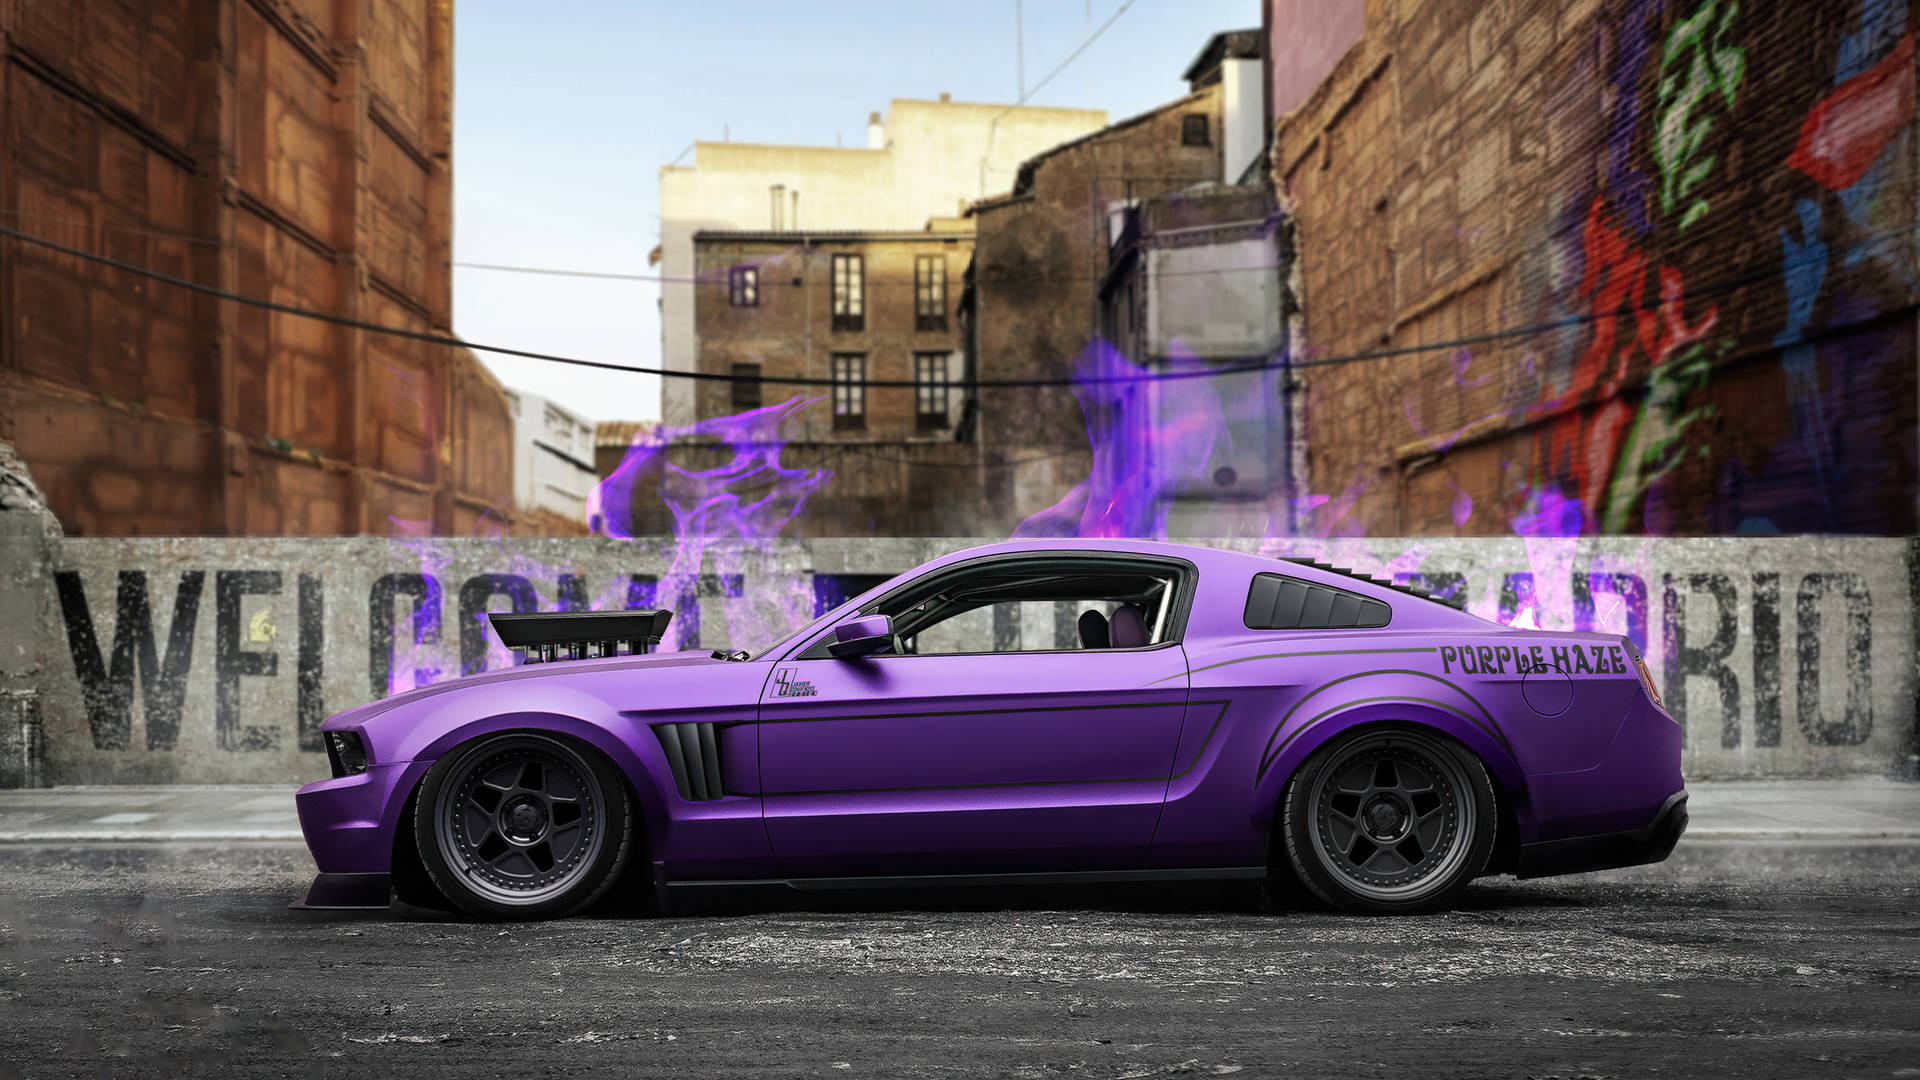 Put the Pedal to the Metal with this Classic Style Mustang Wallpaper